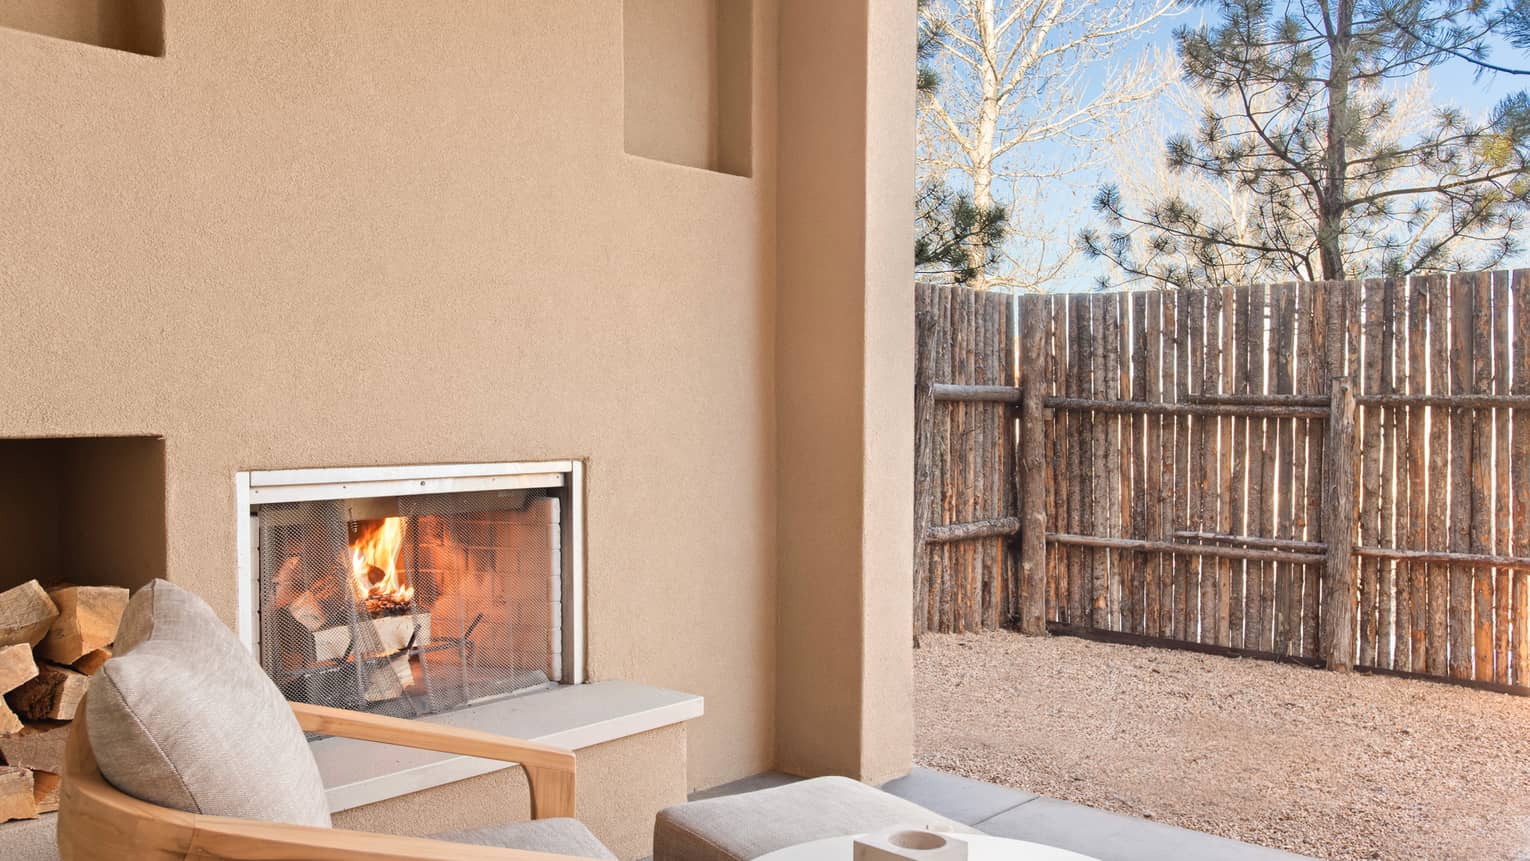 Fireplace and lounge chair on a private patio of Casita Room at Four Seasons Resort Santa Fe